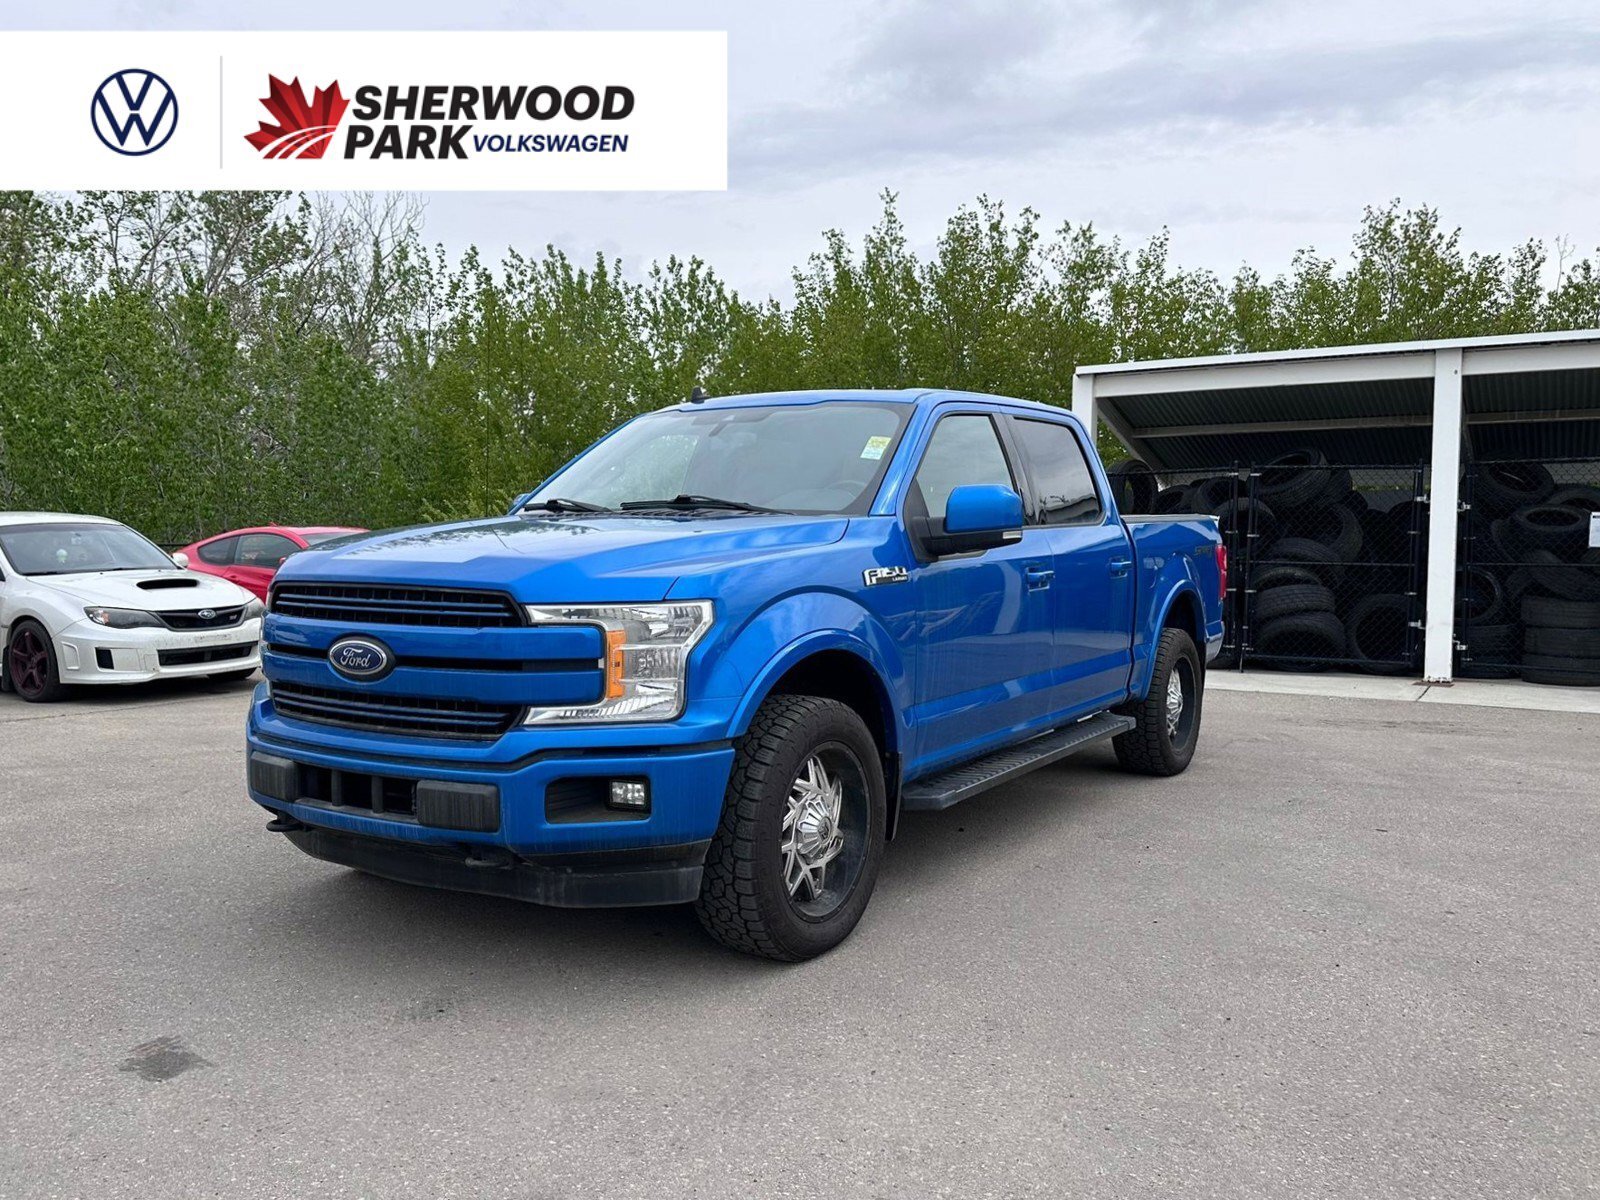 2020 Ford F-150 Lariat | 4X4 | Leather | Moonroof